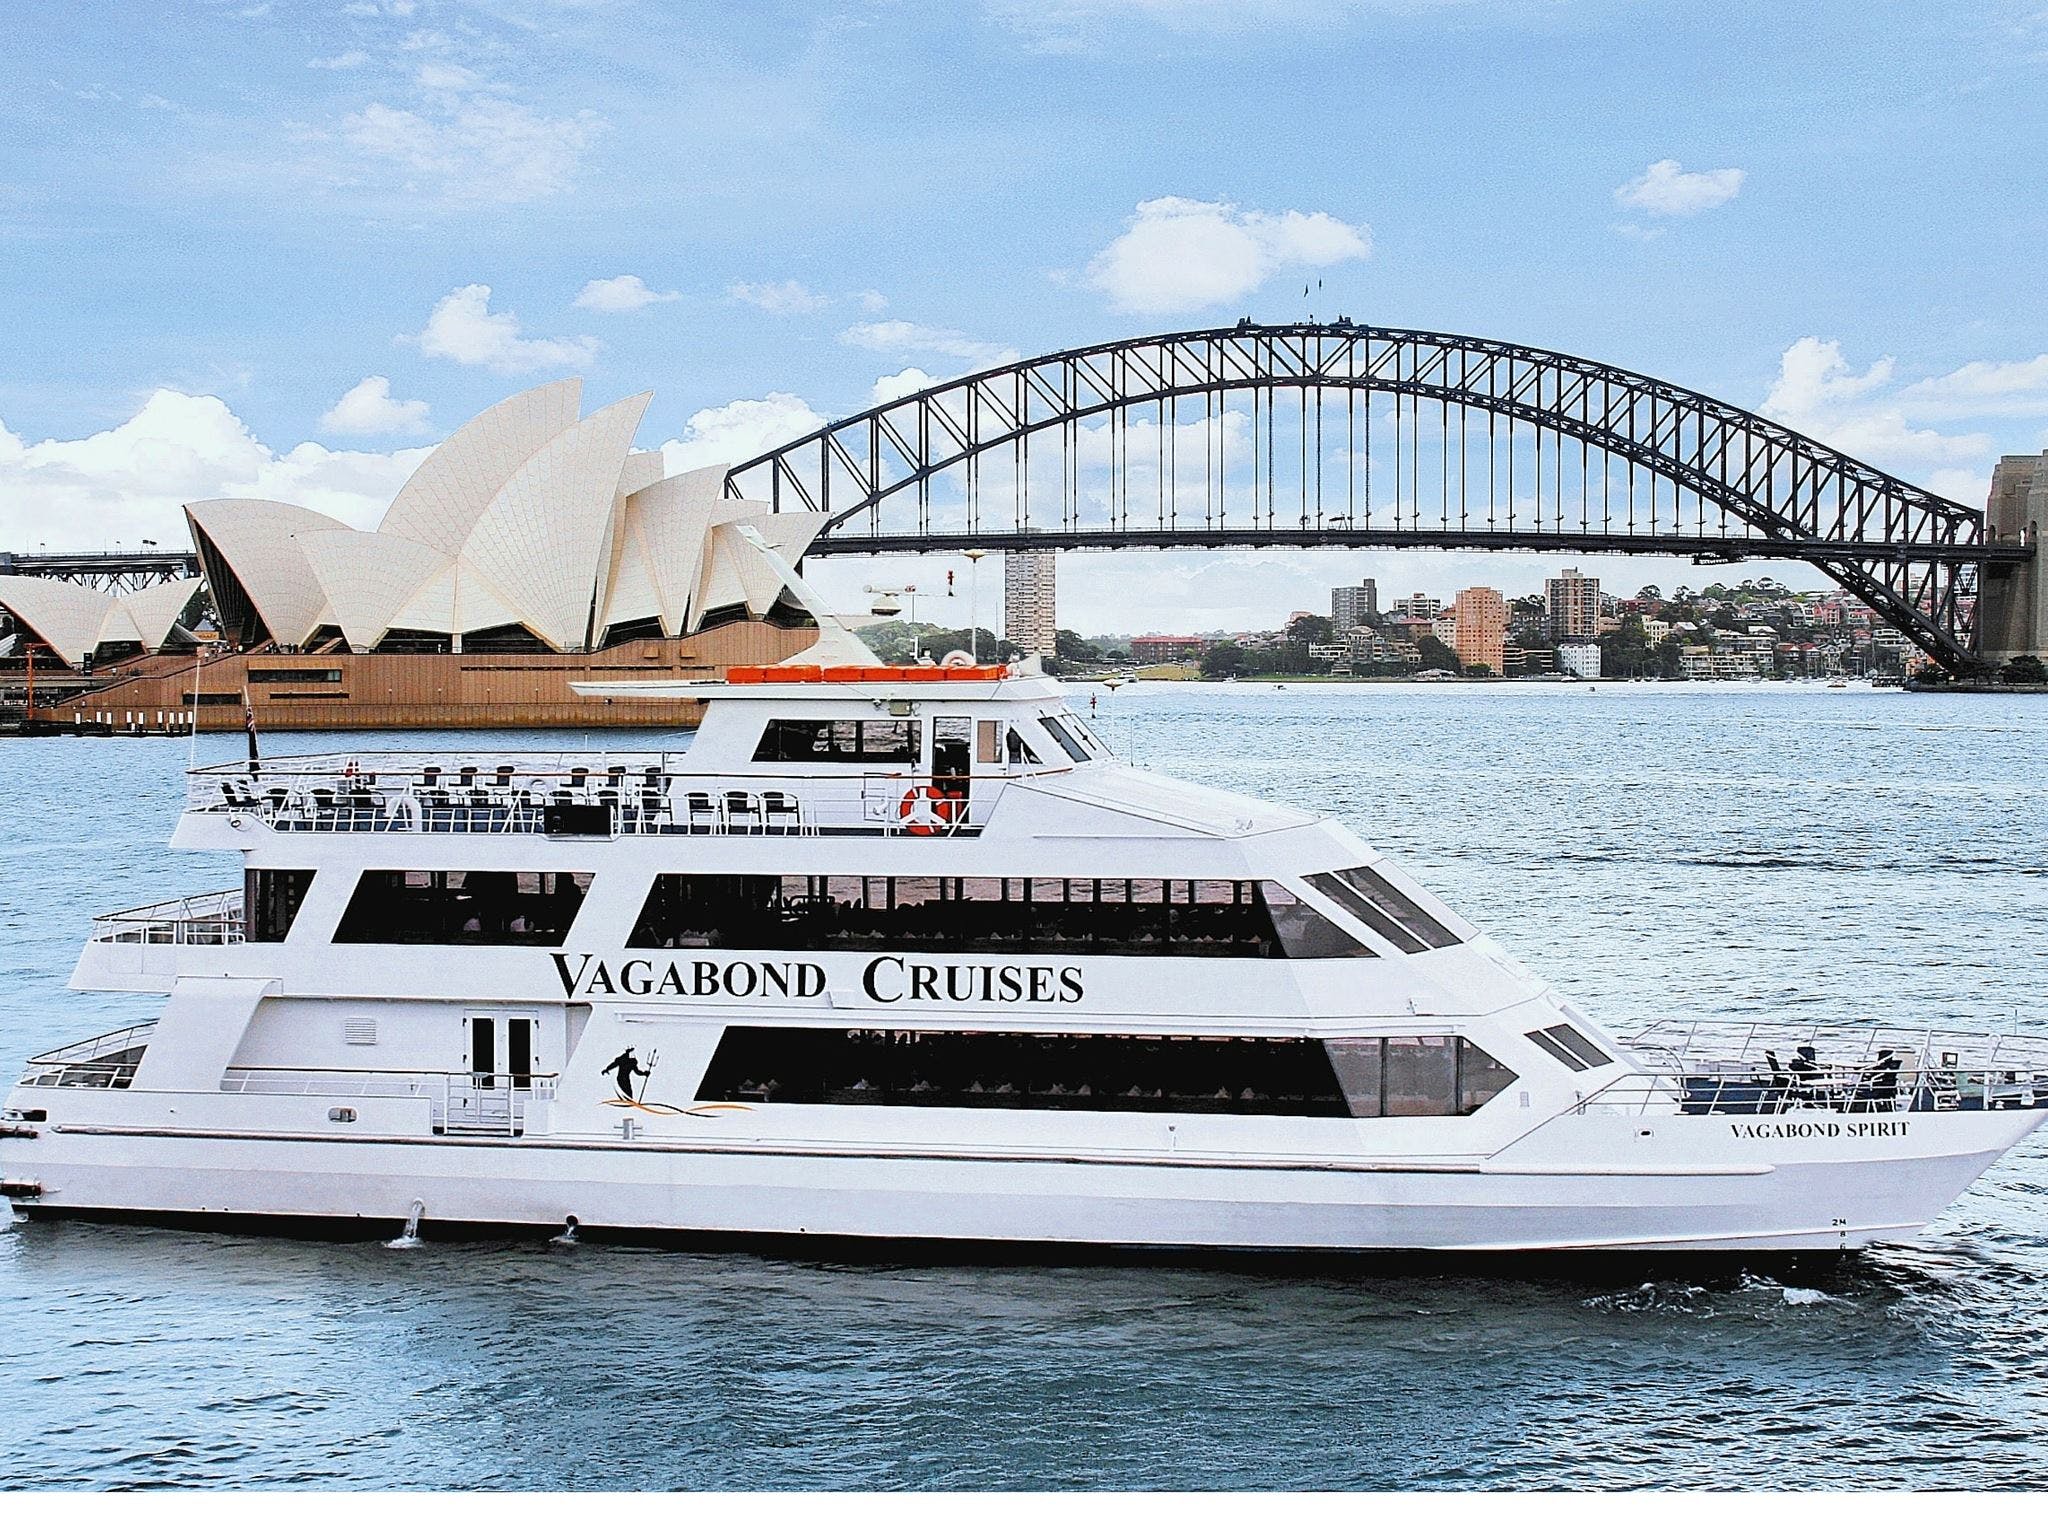 Melbourne Cup Lunch Cruise with Vagabond Cruises - Surfers Gold Coast